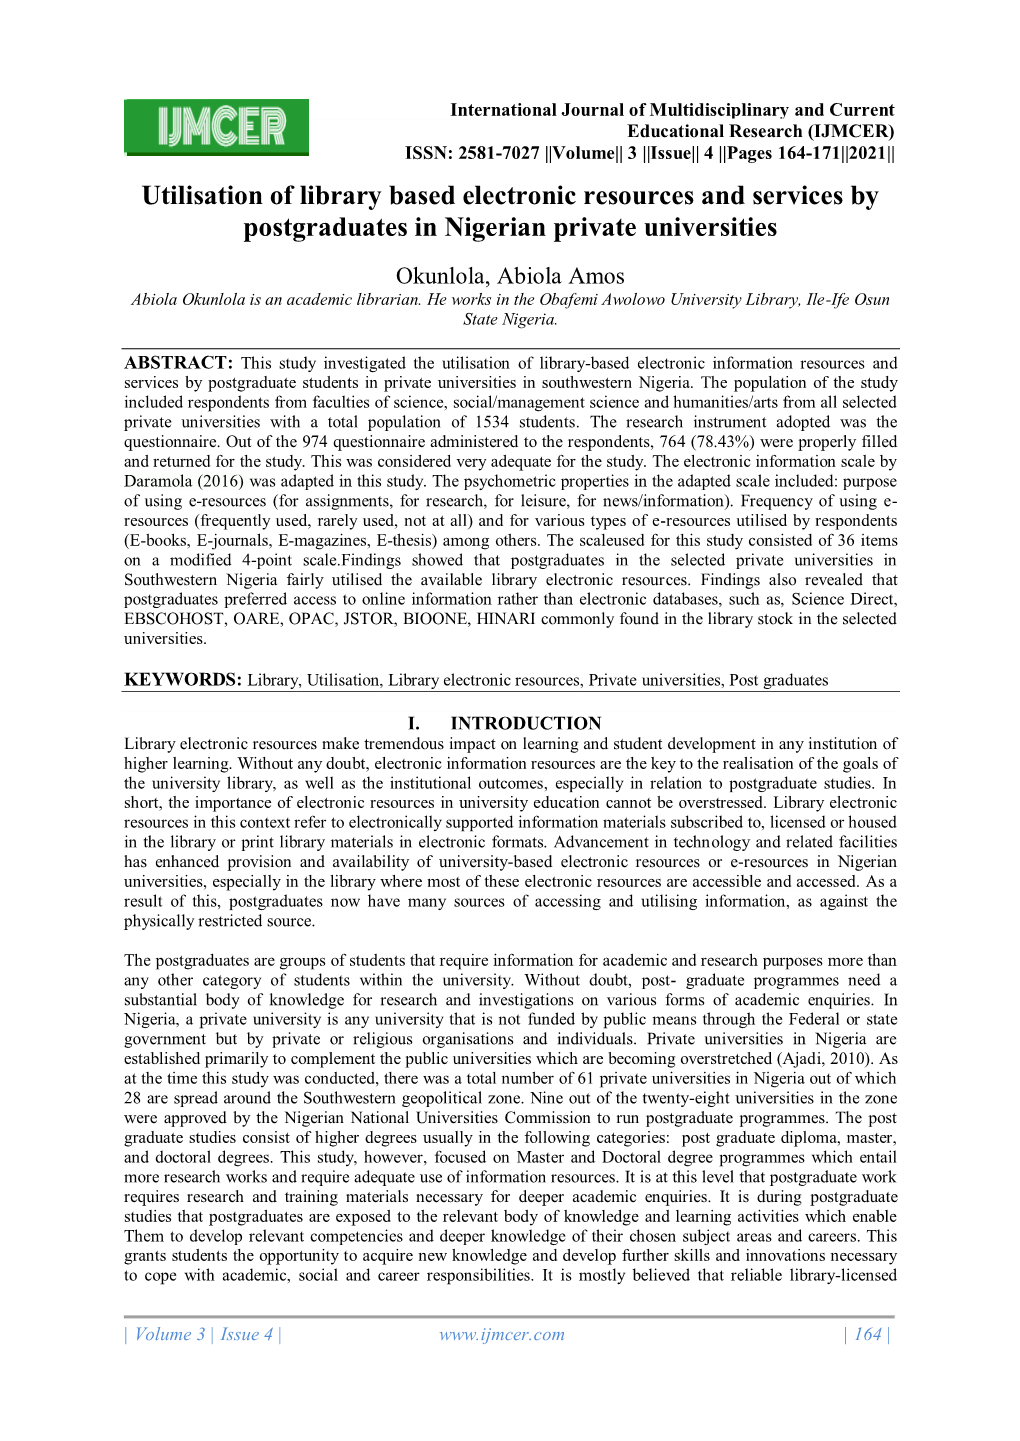 Utilisation of Library Based Electronic Resources and Services by Postgraduates in Nigerian Private Universities